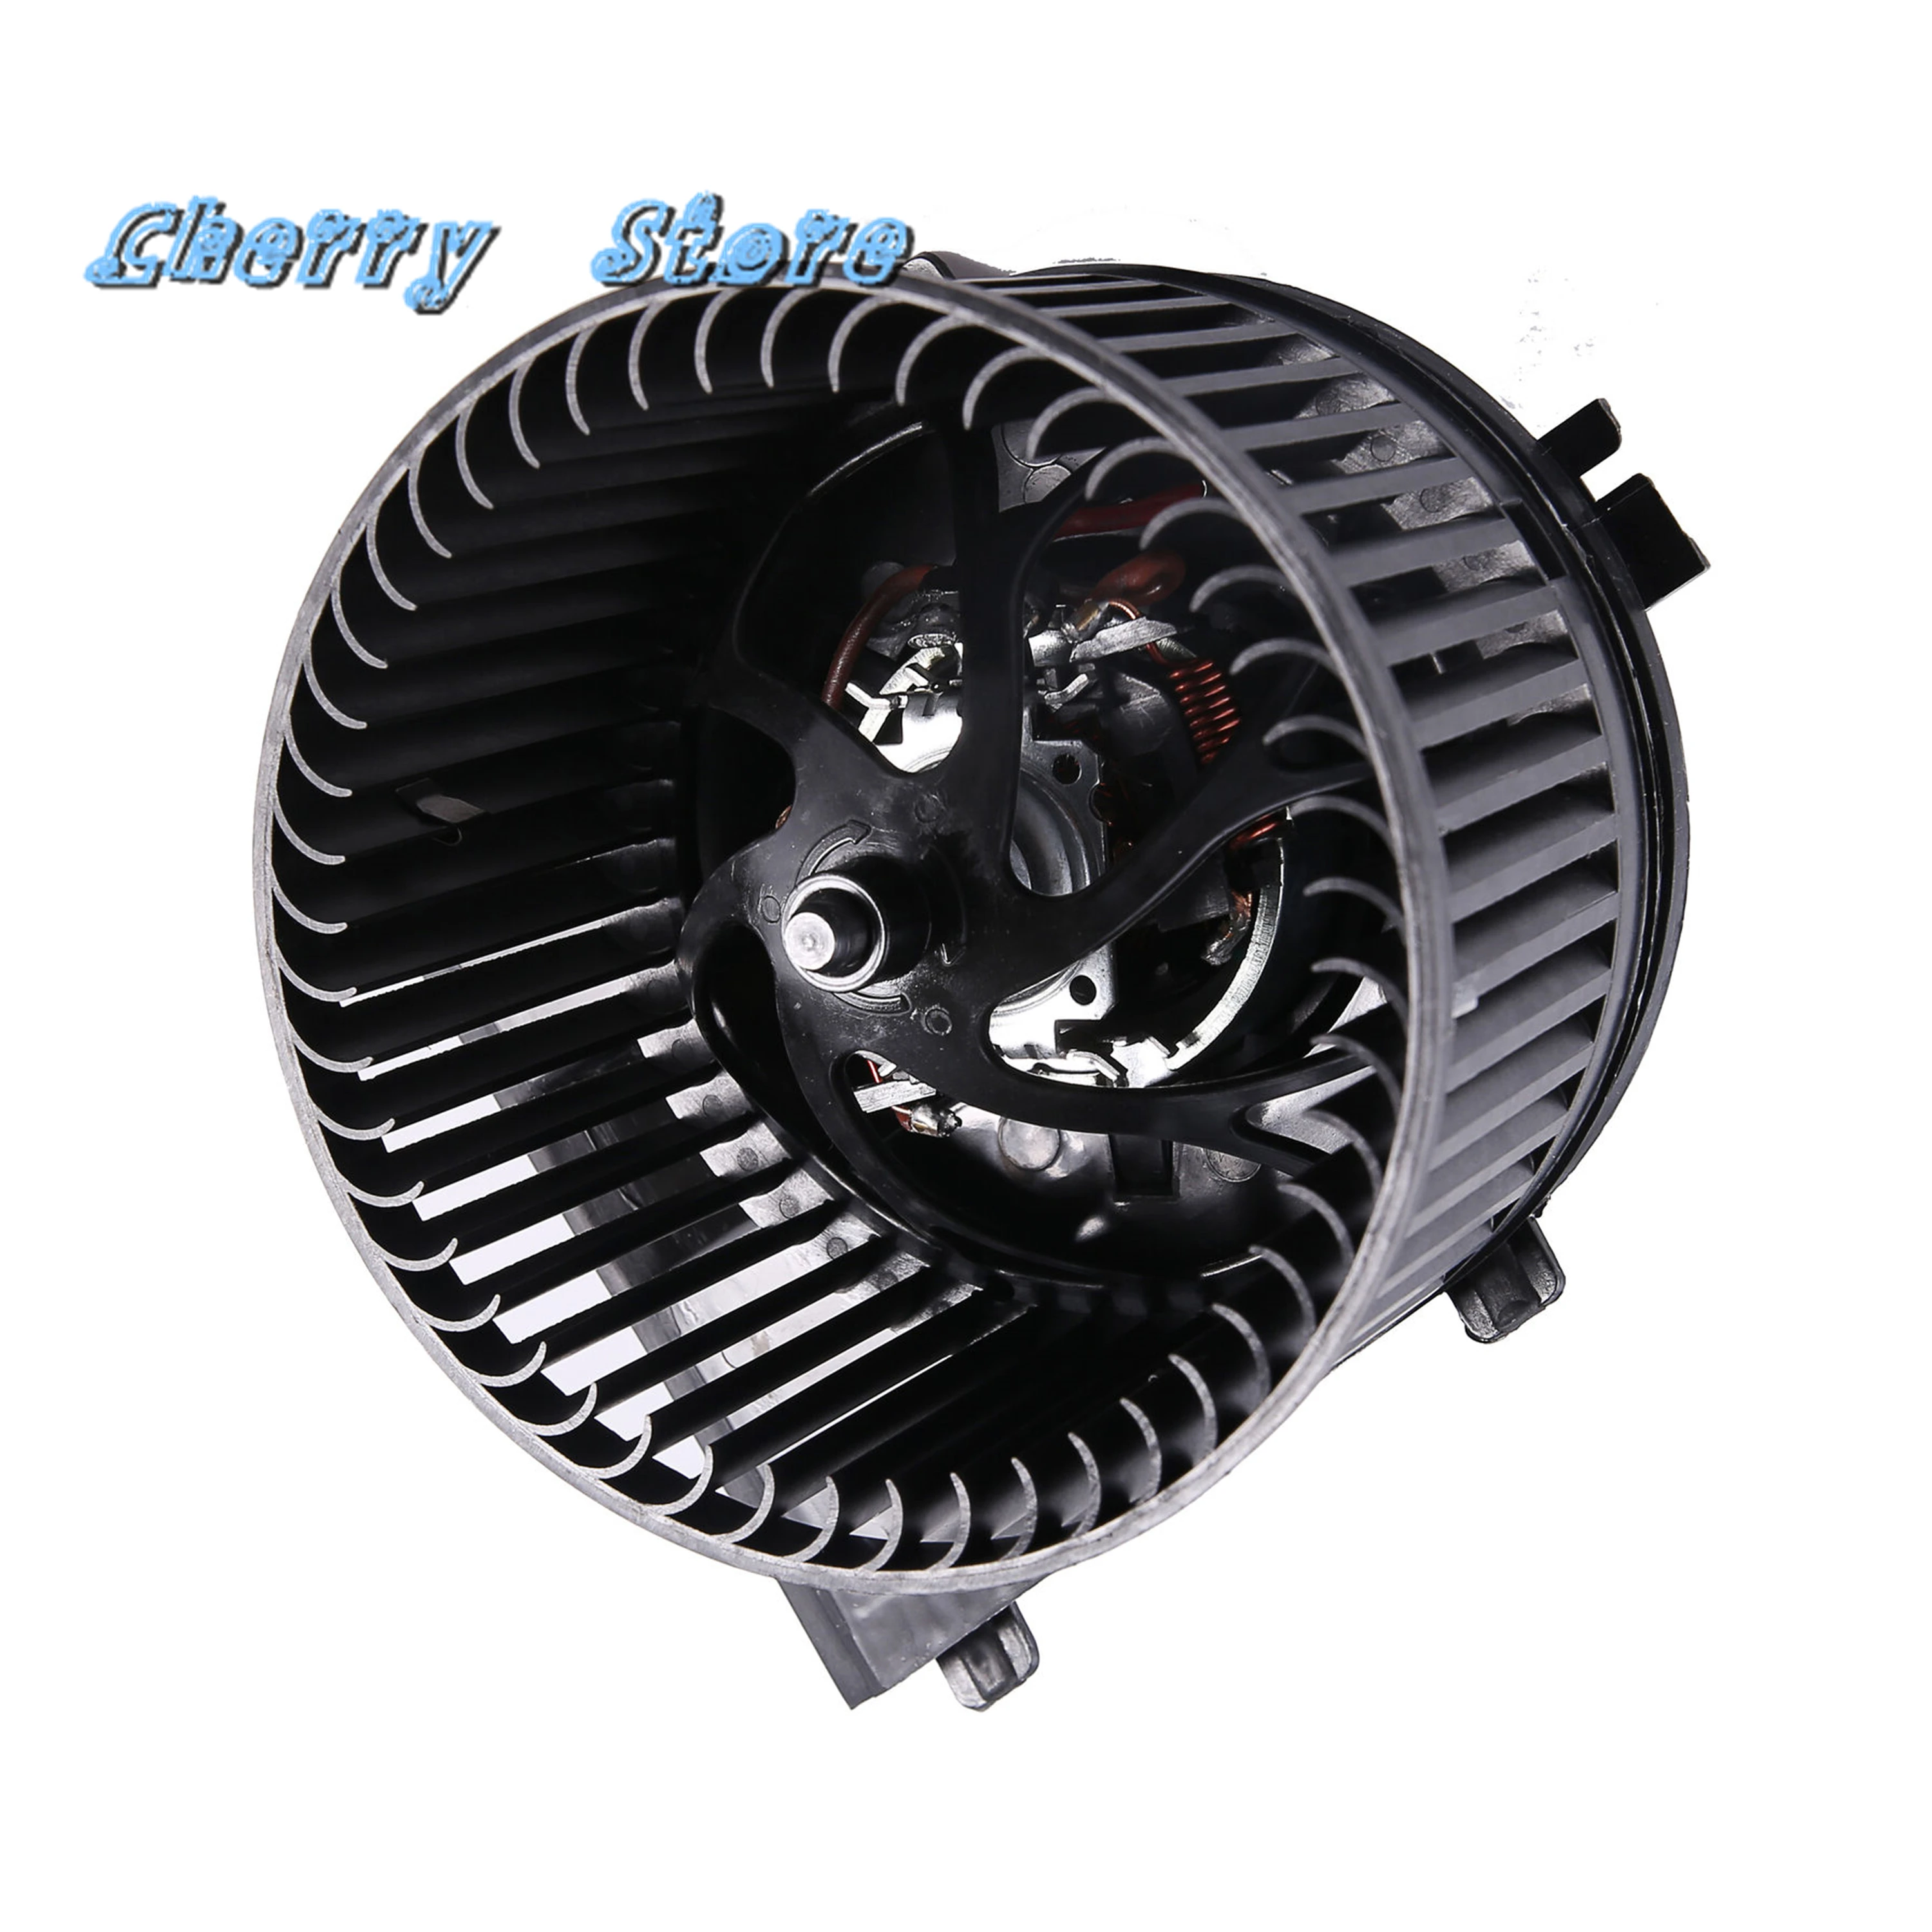 Brand New Front Blower Motor with cage for Volkswagen Beetle 1998-2010 